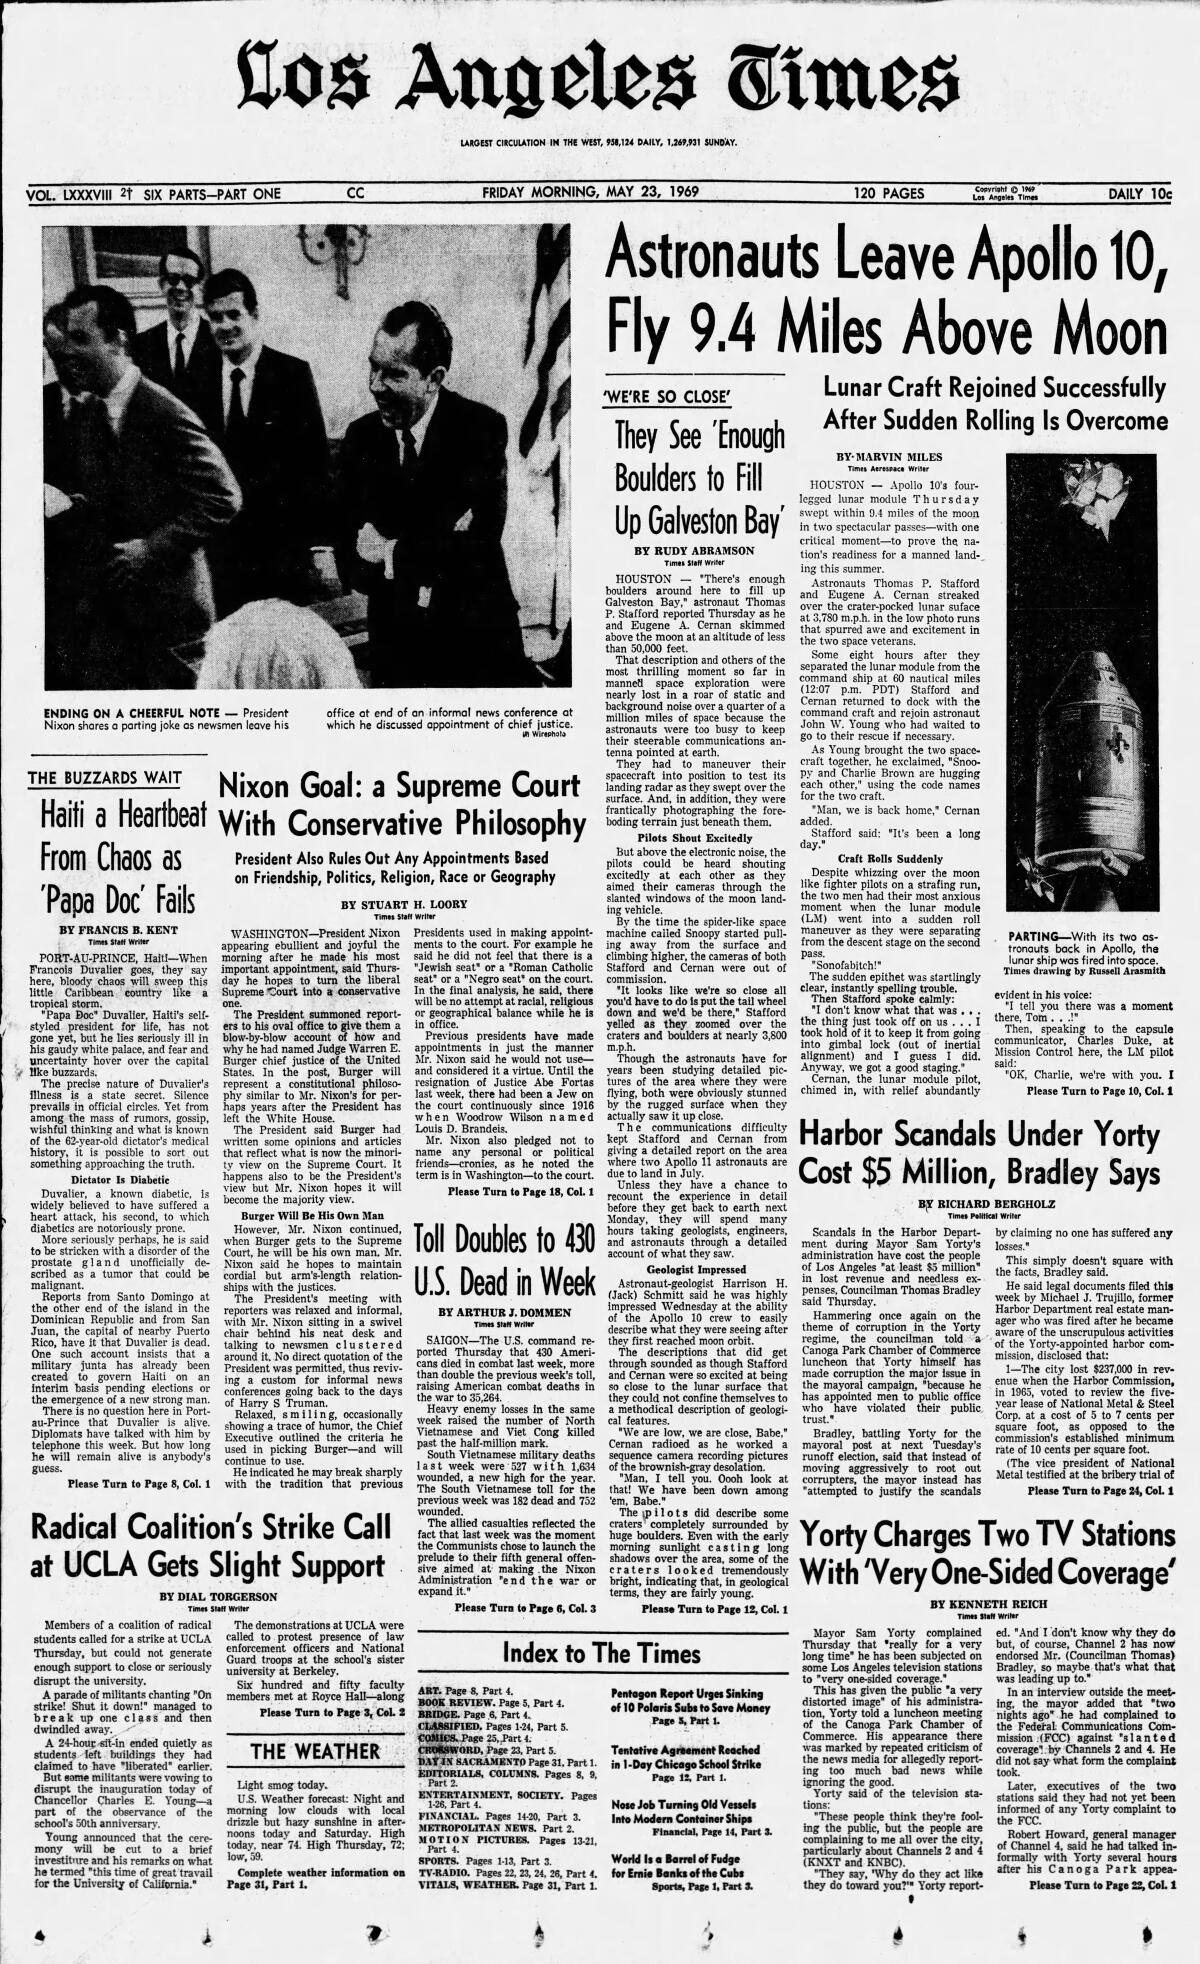 Front page of the Los Angeles Times from 1969